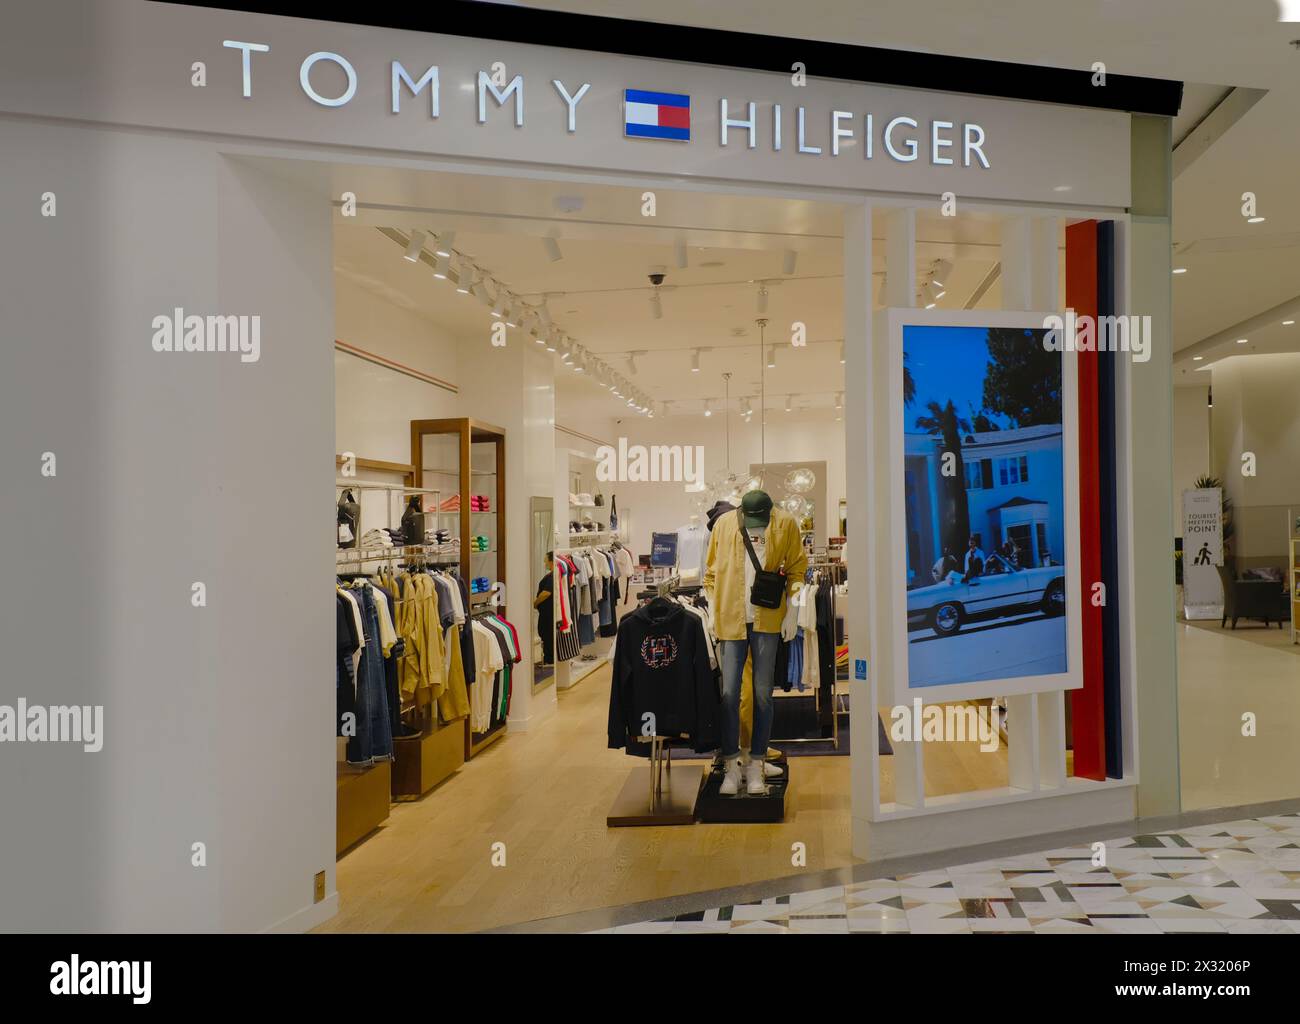 Tommy Hilfiger Store in Thailand Stockfoto